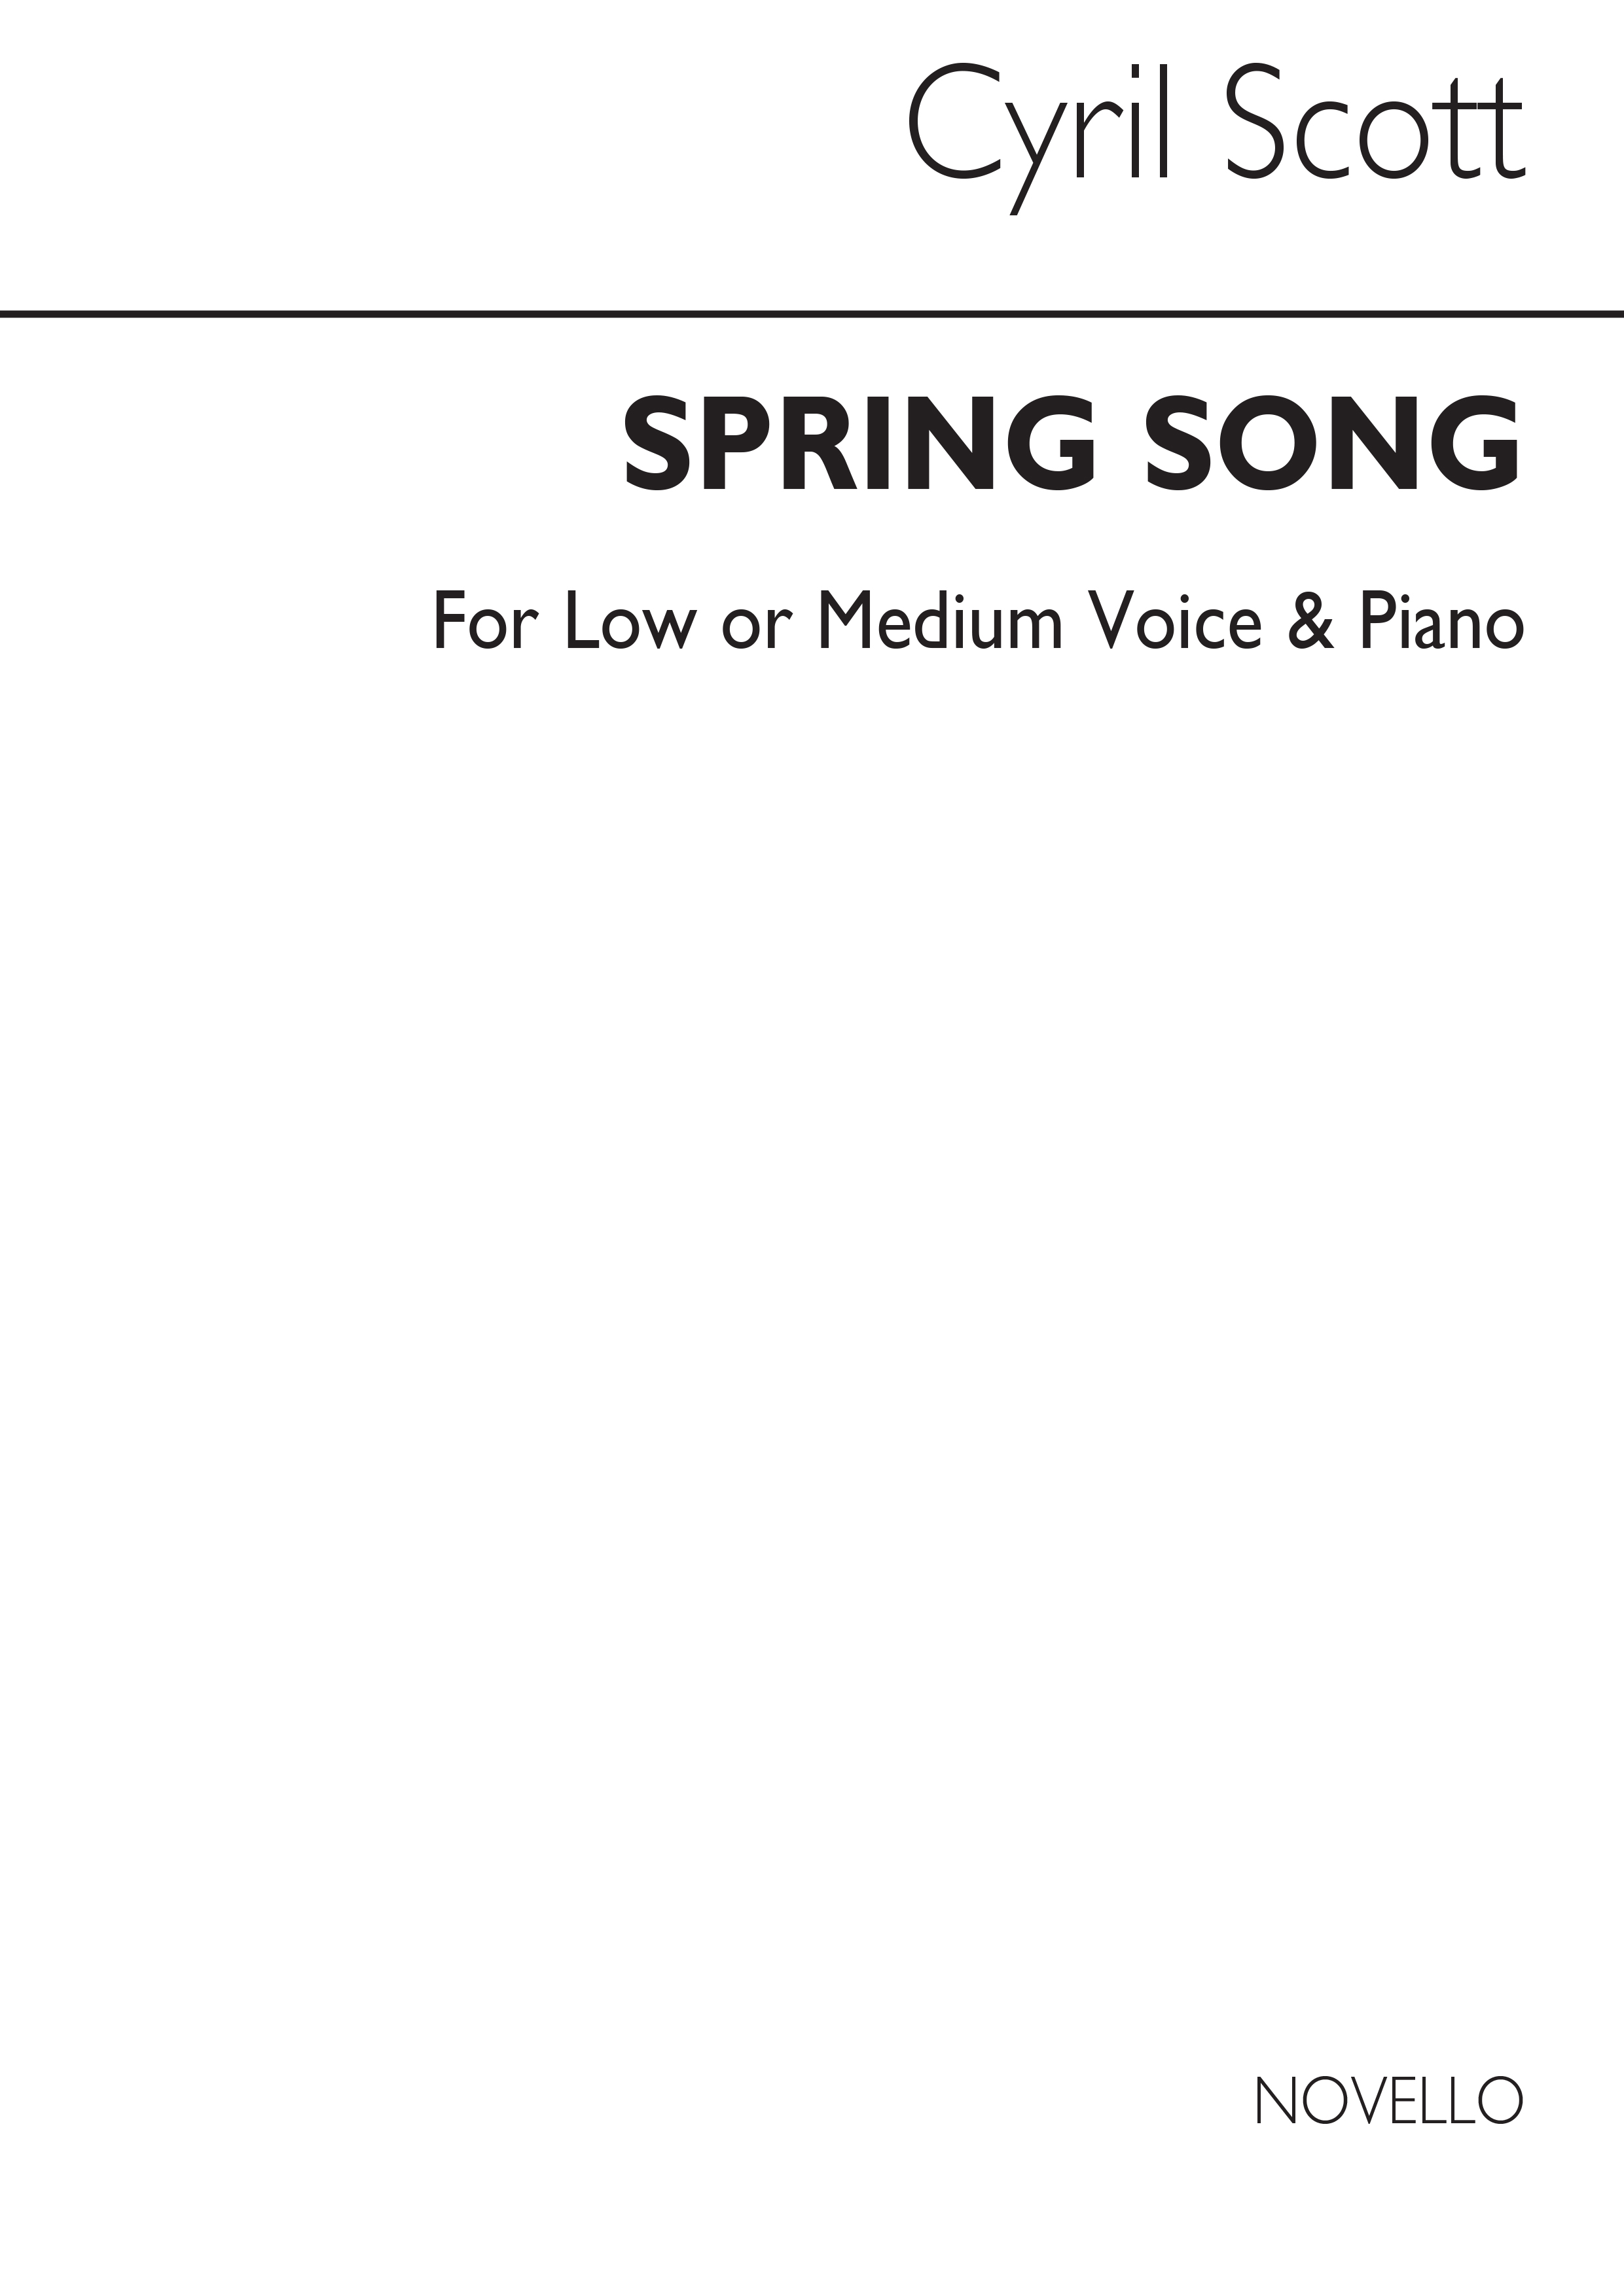 Cyril Scott: Spring Song-low Or Medium Voice/Piano: Low Voice: Vocal Work